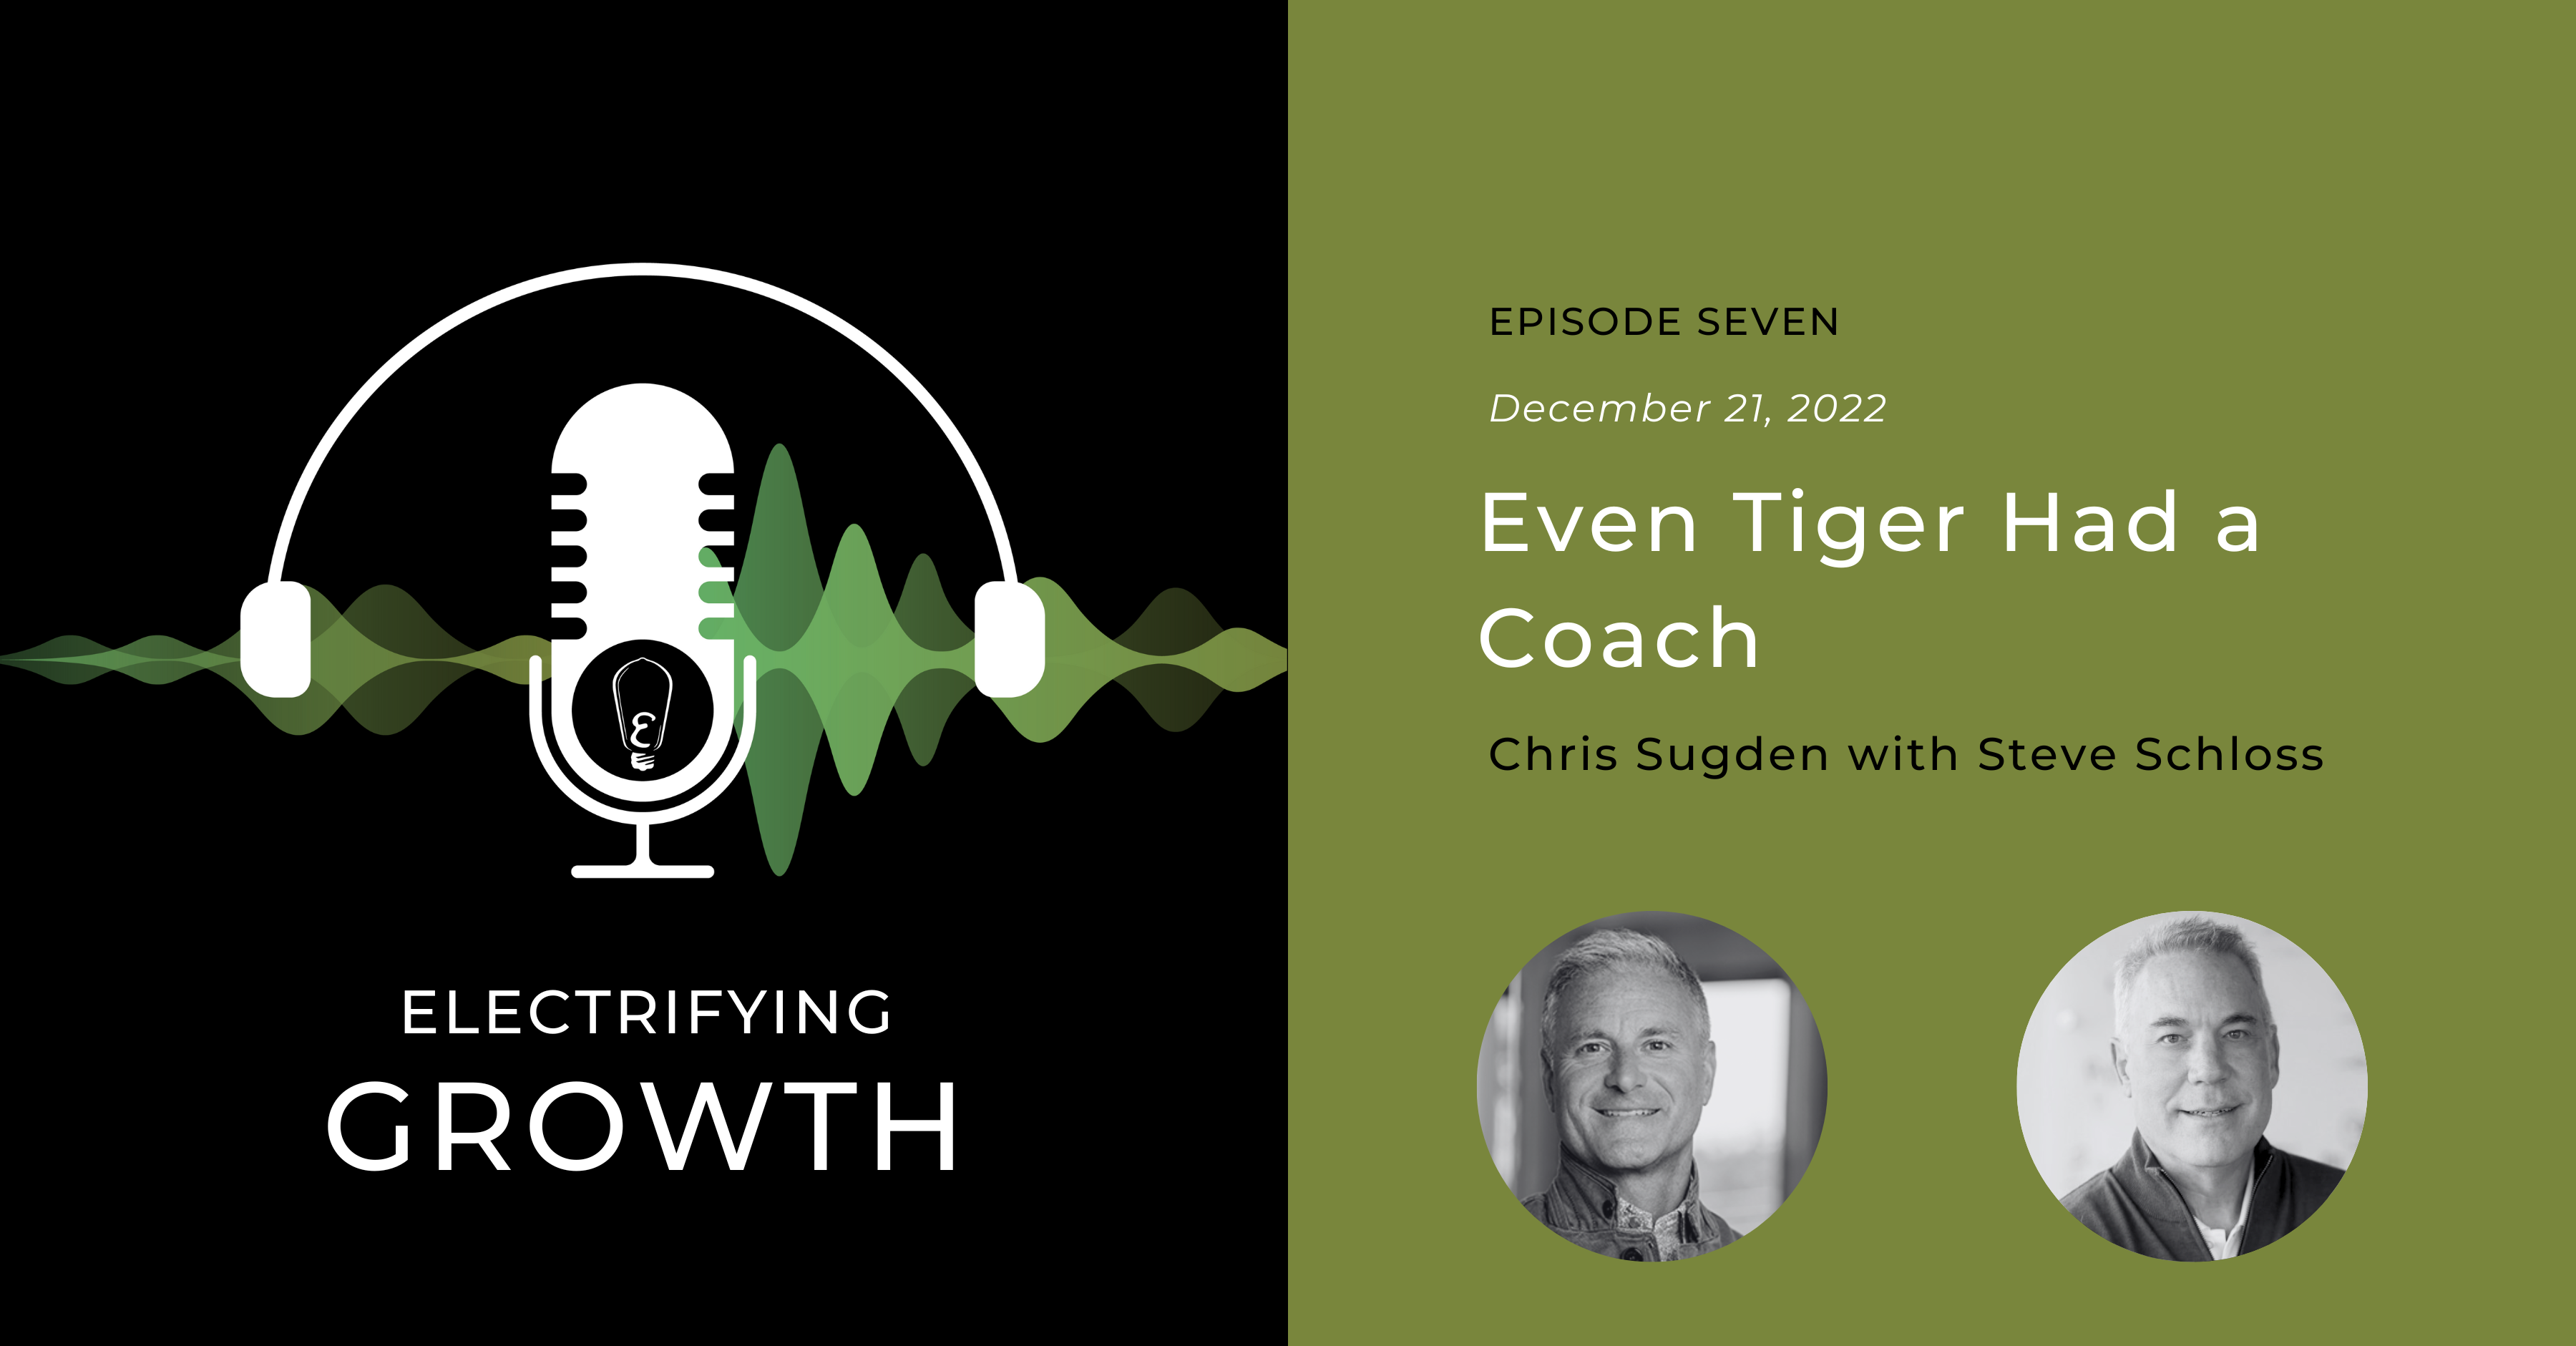 Electrifying Growth Episode 7: Even Tiger Had a Coach with Steve Schloss